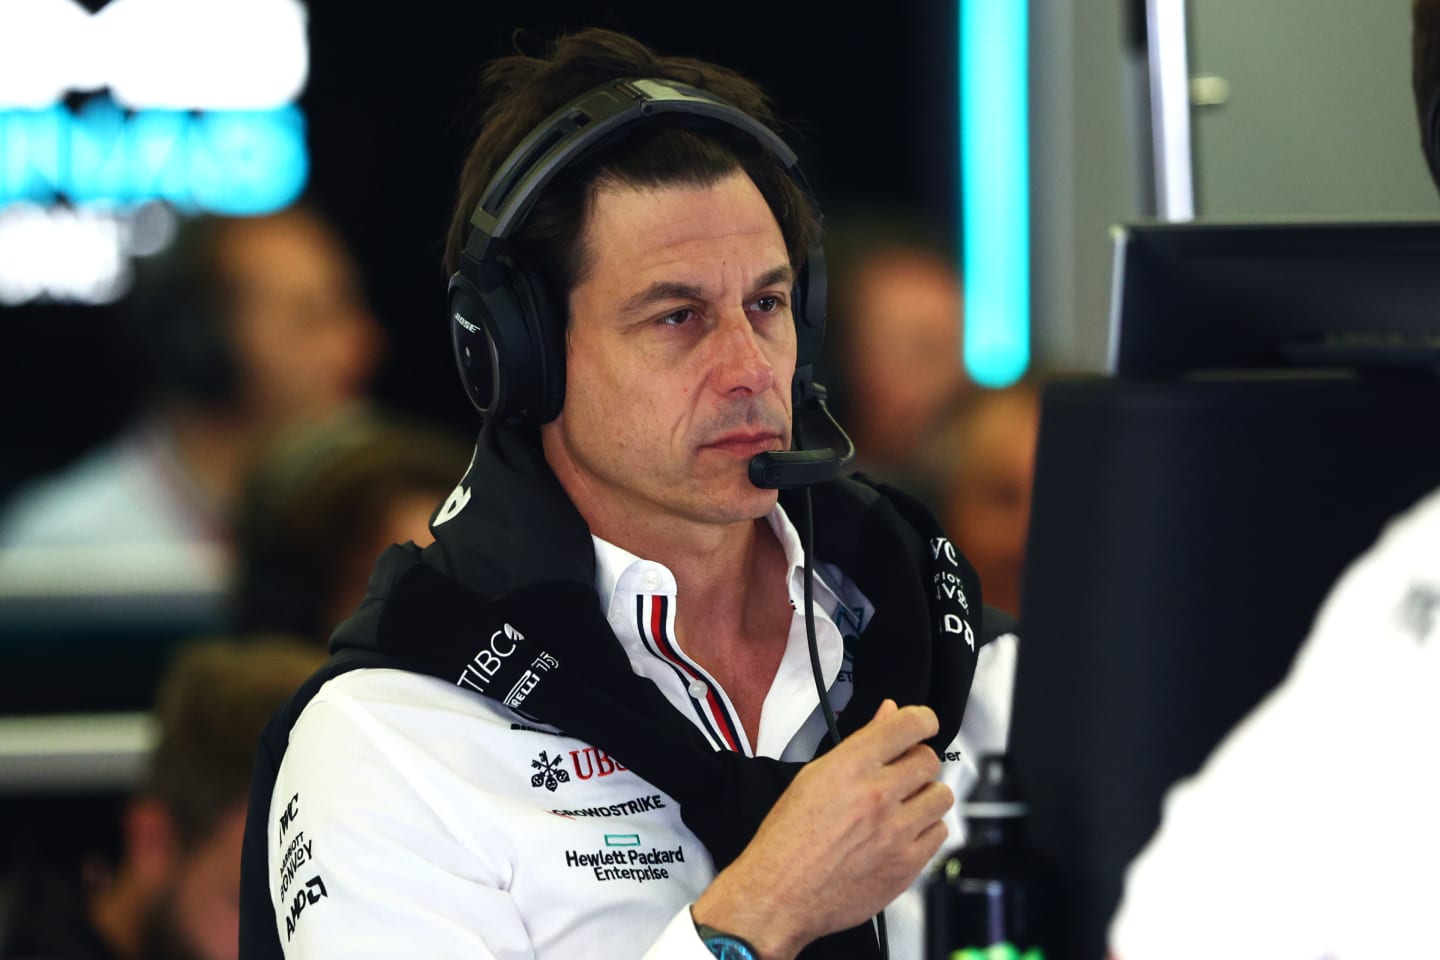 SPIELBERG, AUSTRIA - JULY 09: Mercedes GP Executive Director Toto Wolff looks on in the garage